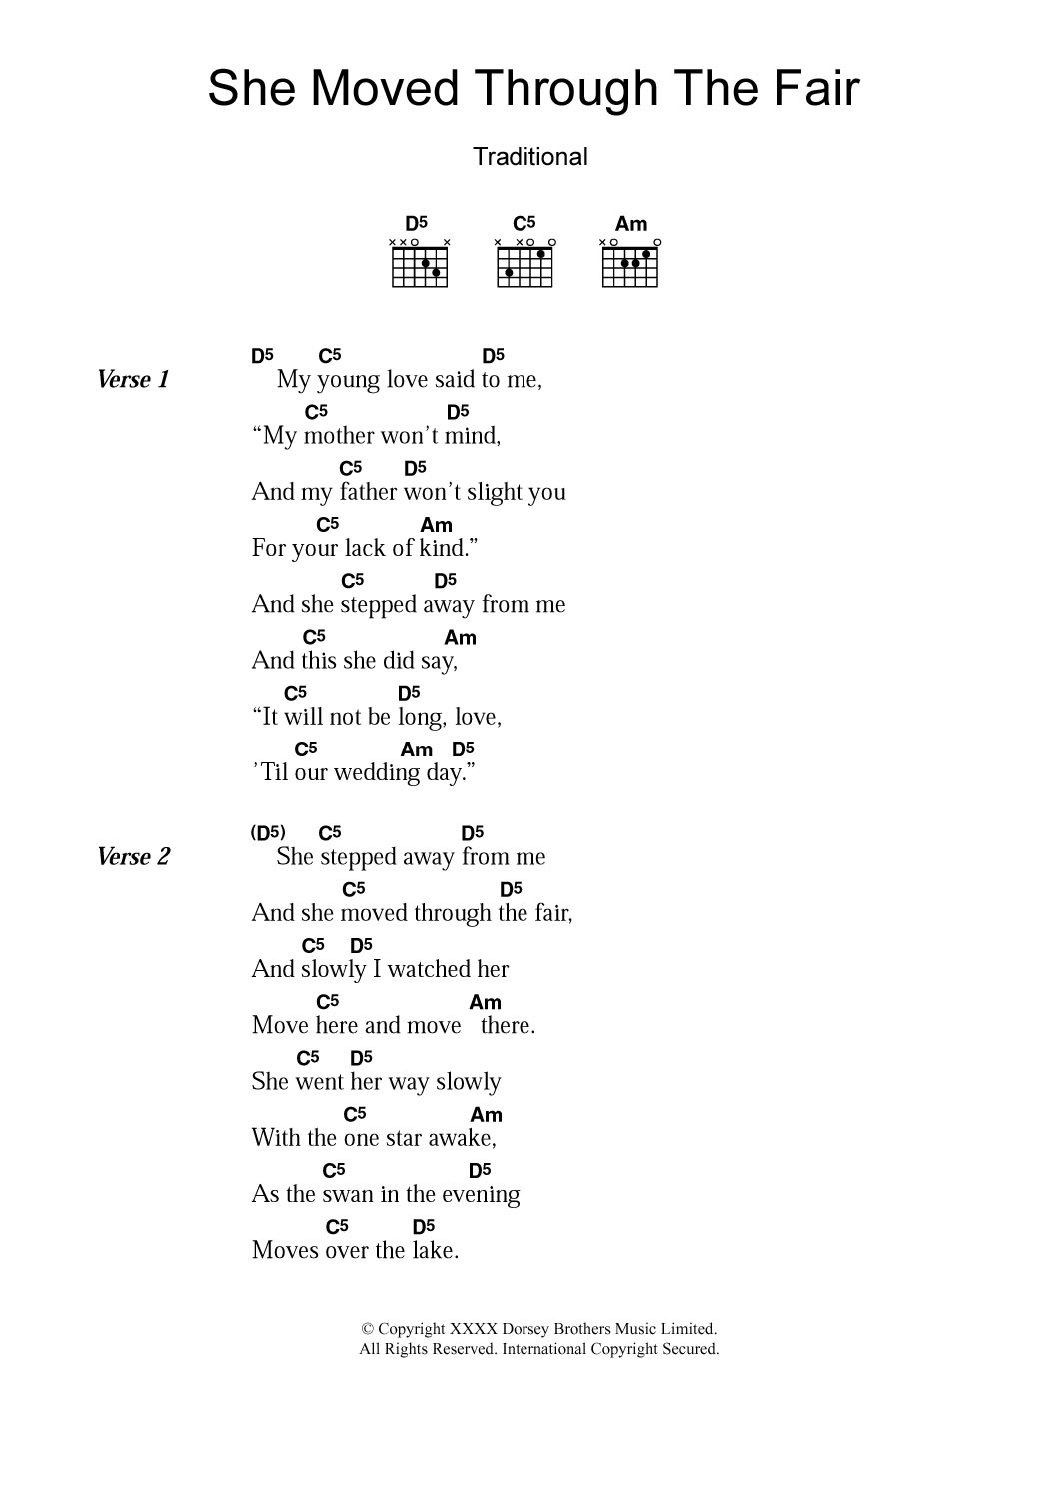 Download Irish Folksong She Moved Through The Fair Sheet Music